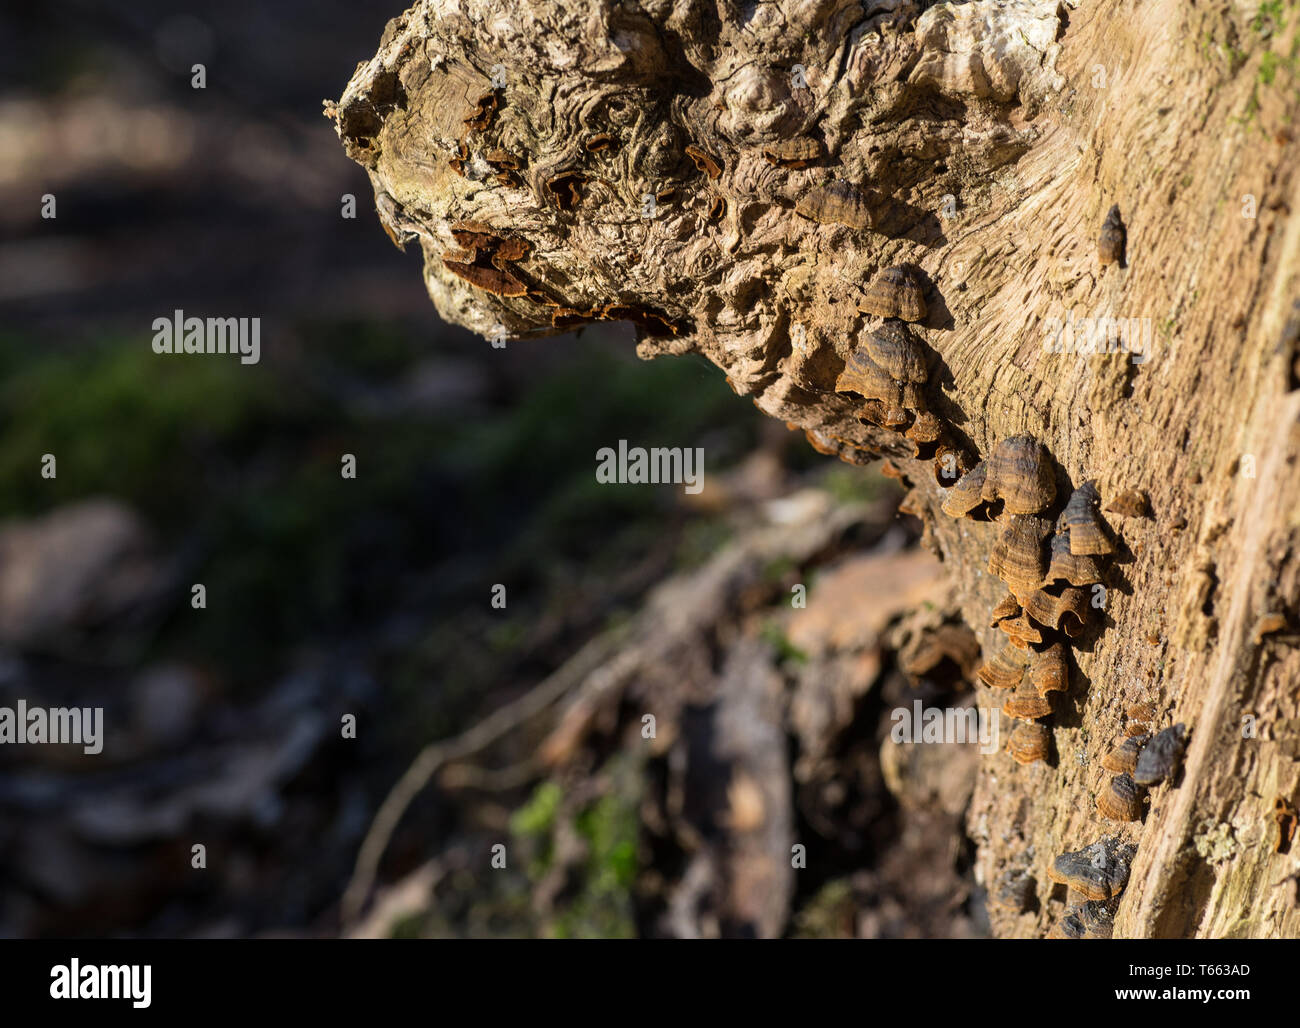 Close-up of old tree trunk with wild-grown mushrooms Stock Photo